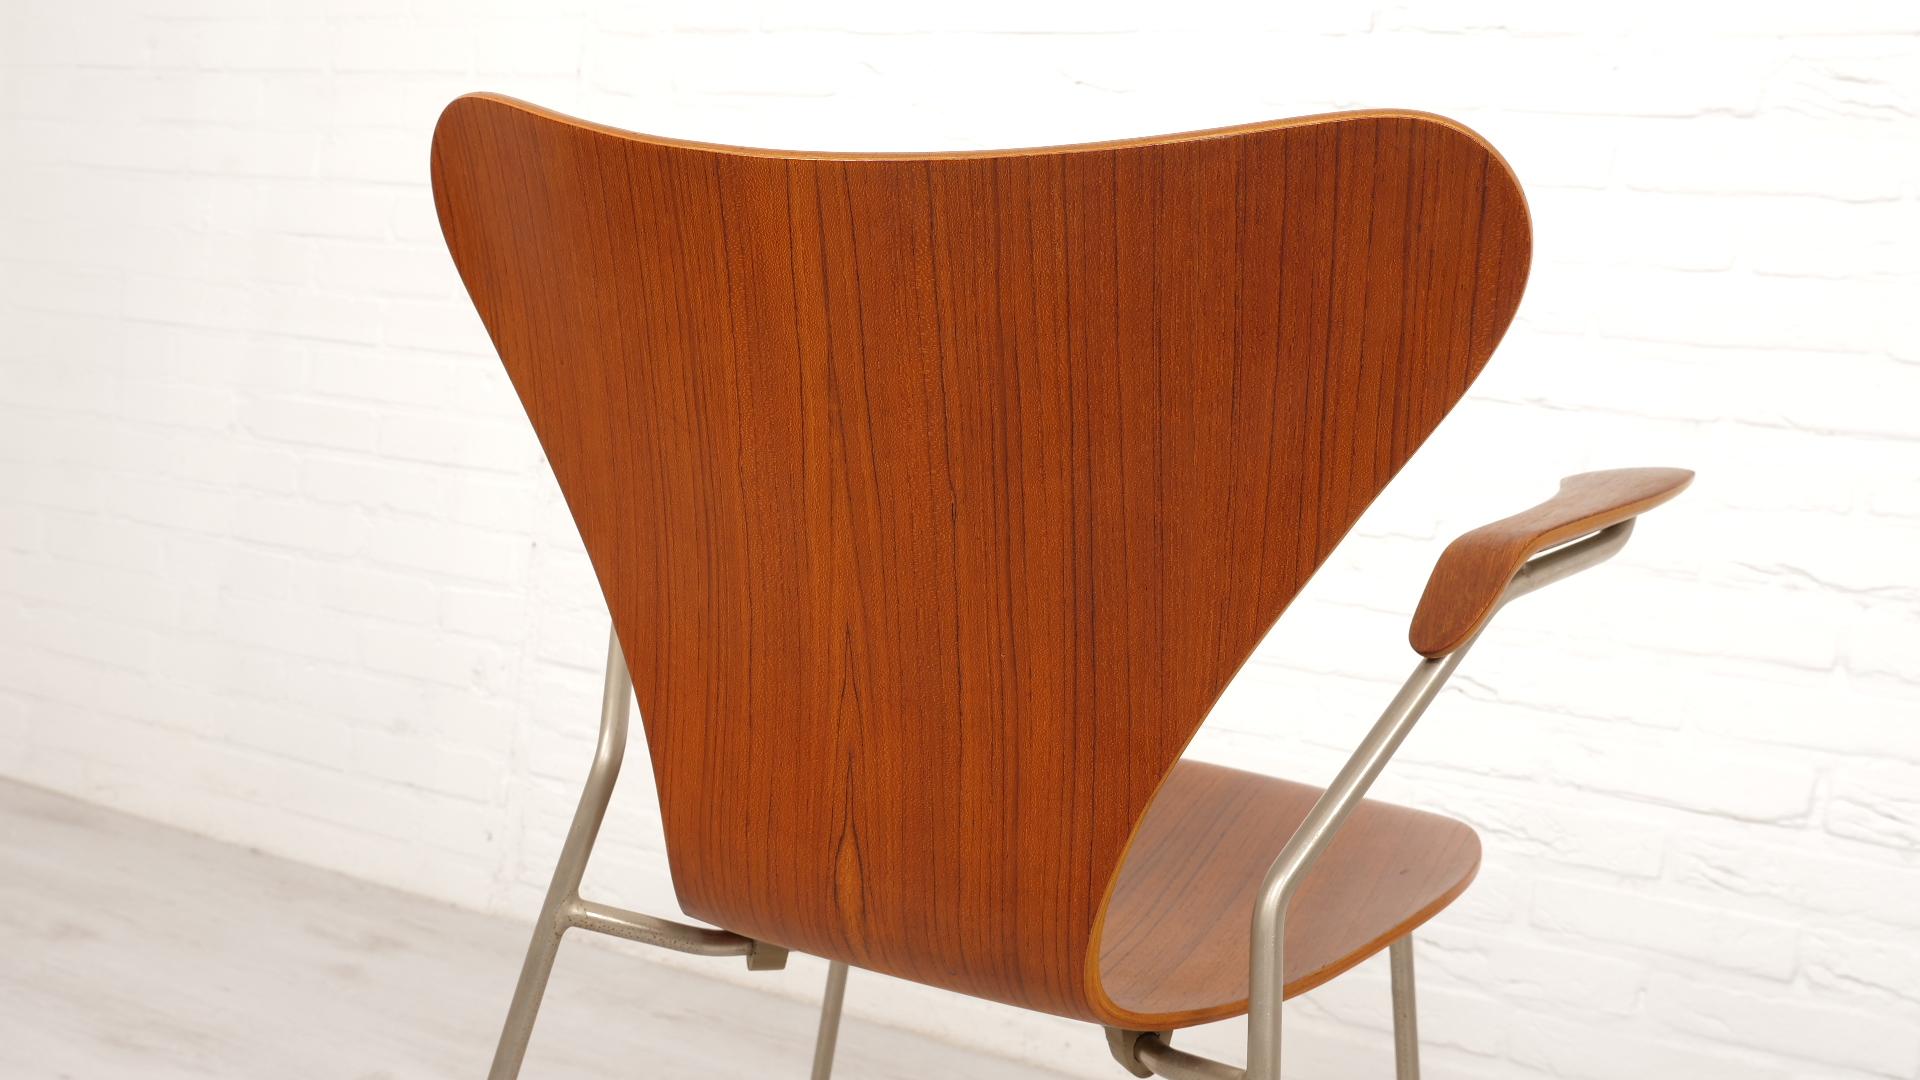 2 Vintage butterfly chairs with armrests by Arne Jacobsen model 3207 Teak For Sale 12